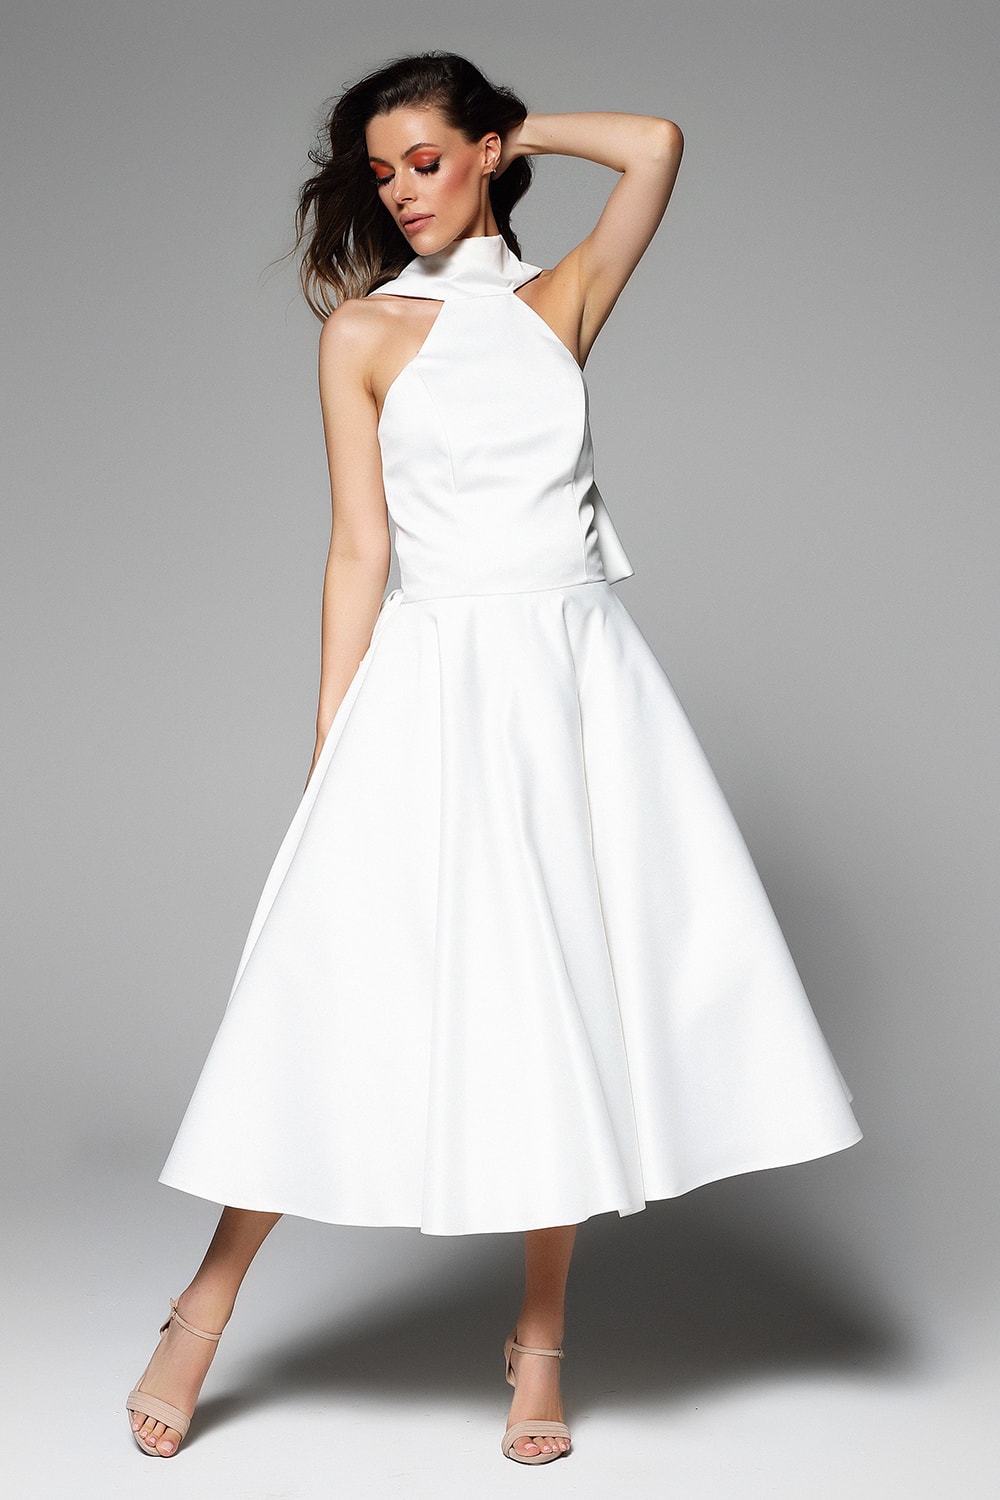 White gown with bow